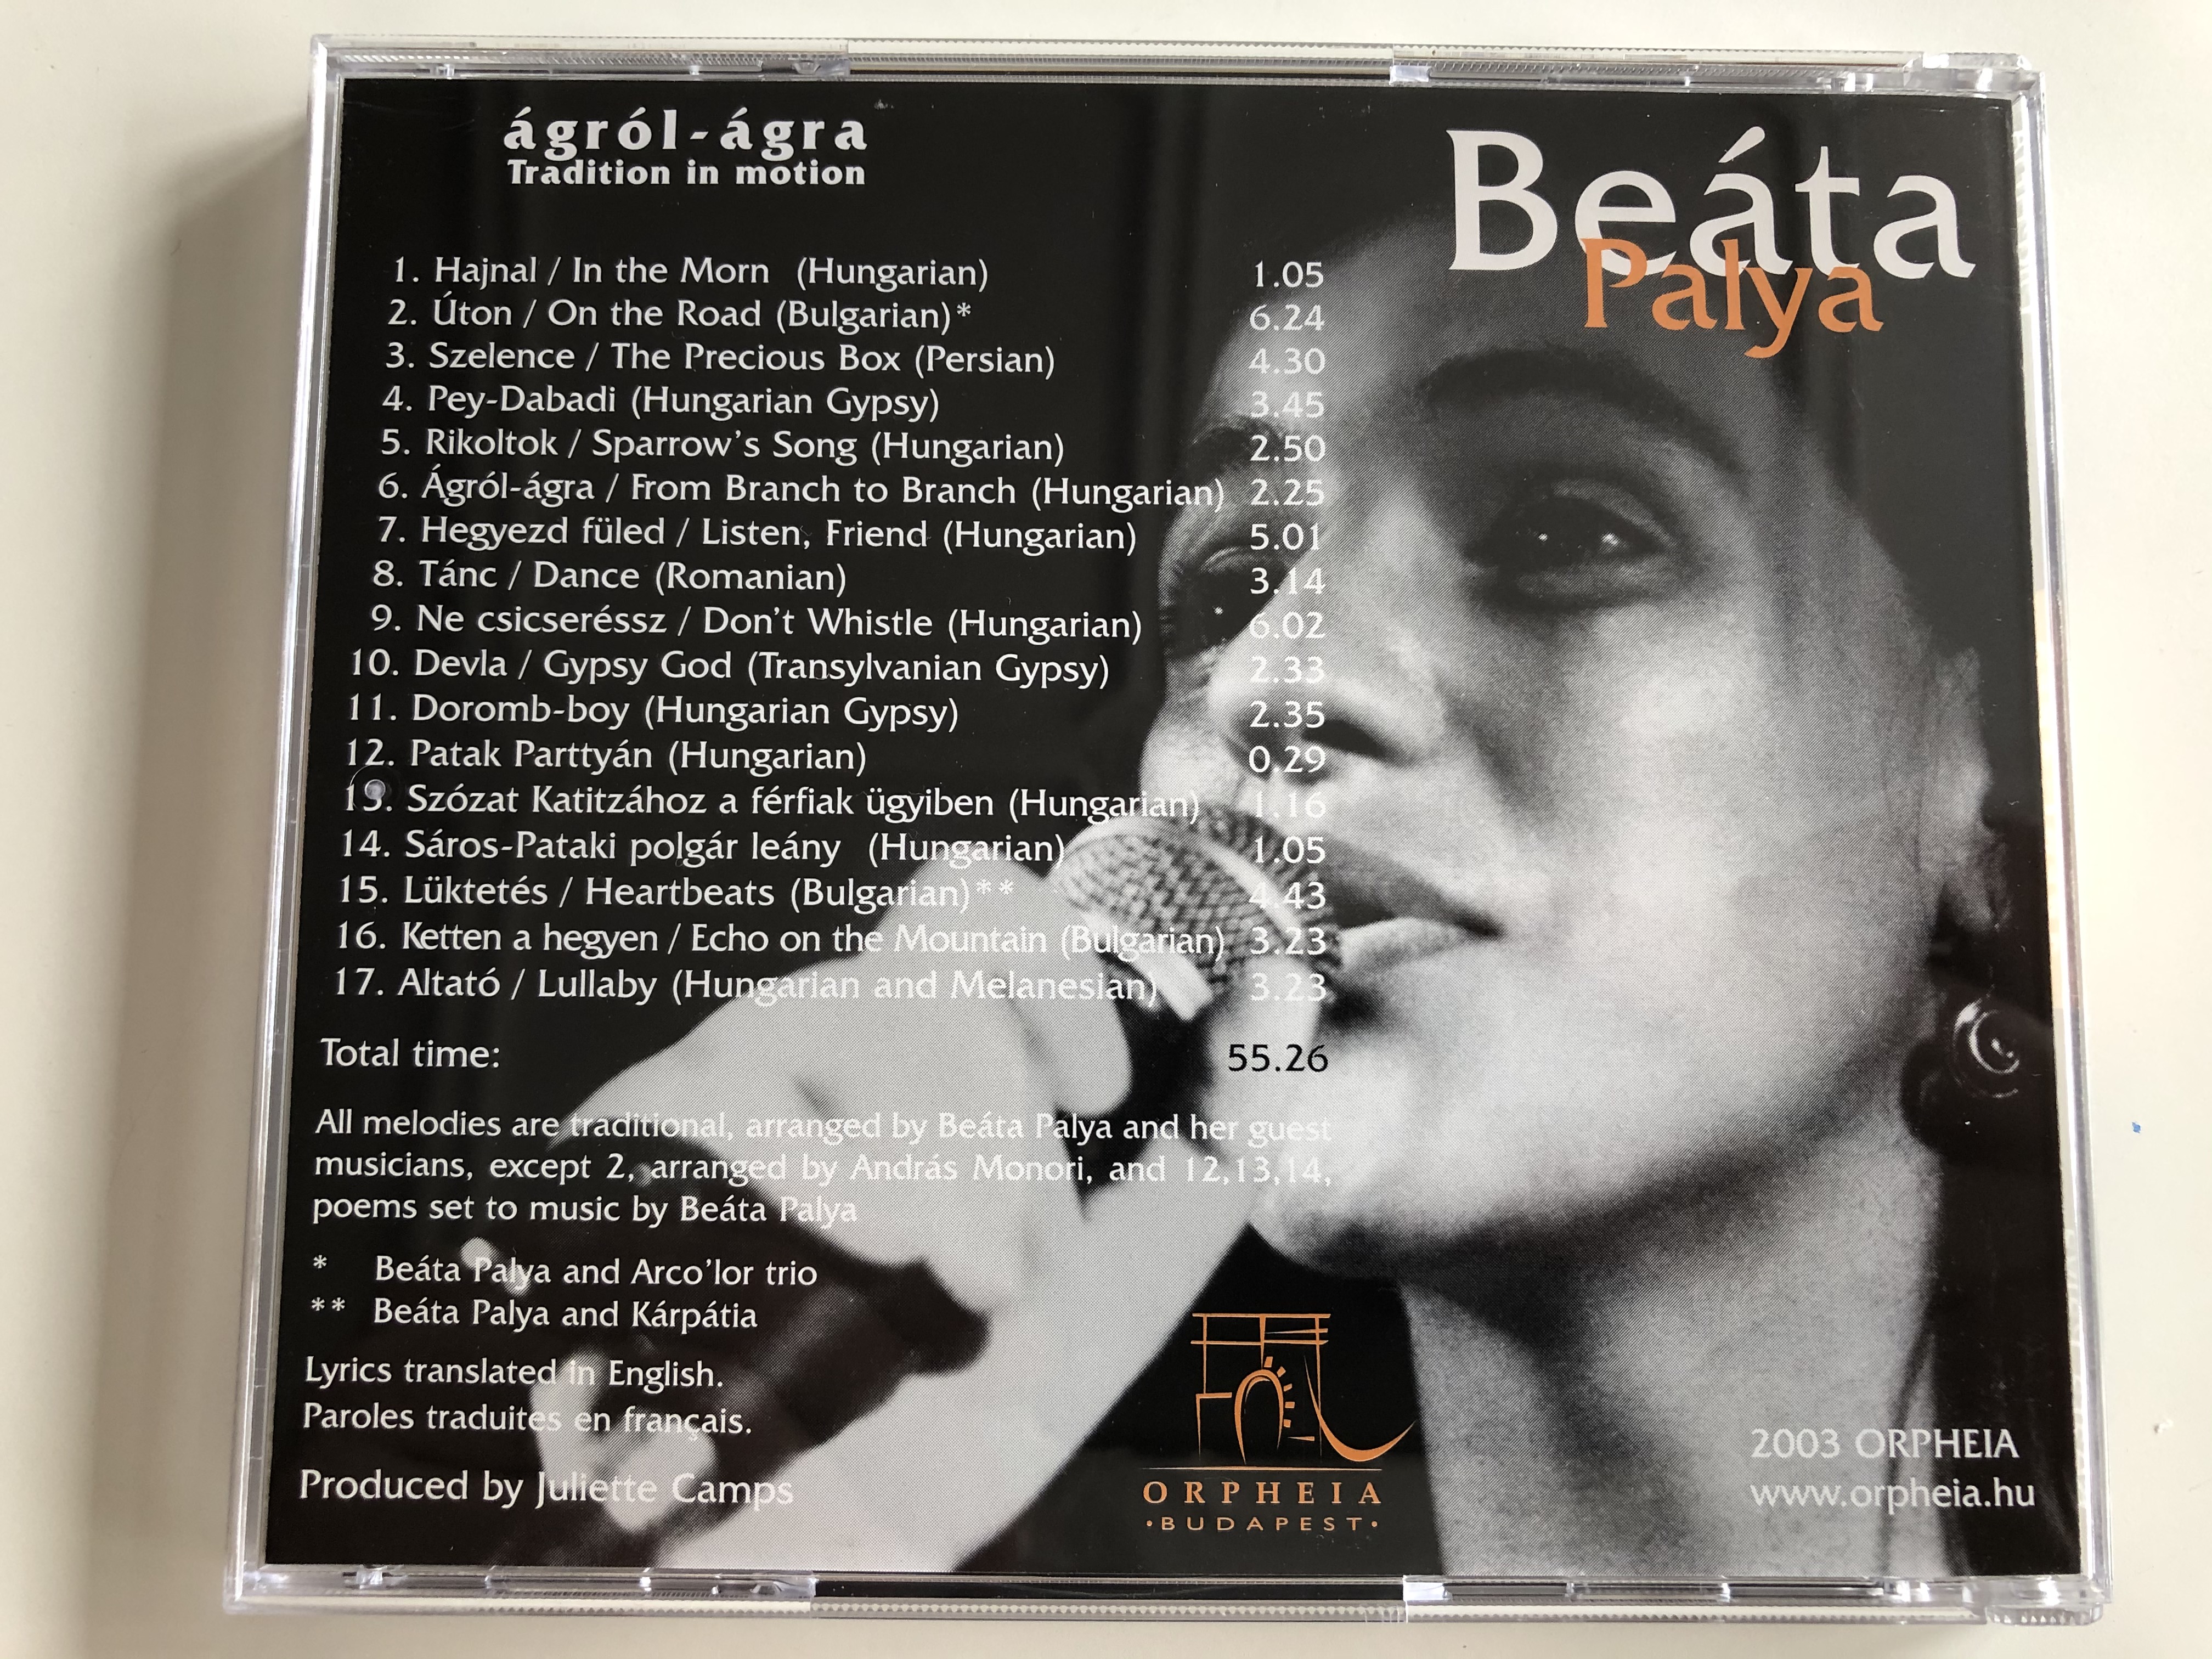 be-ta-palya-gr-l-gra-tradition-in-motion-orpheia-audio-cd-2003-orp003bea1-13-.jpg